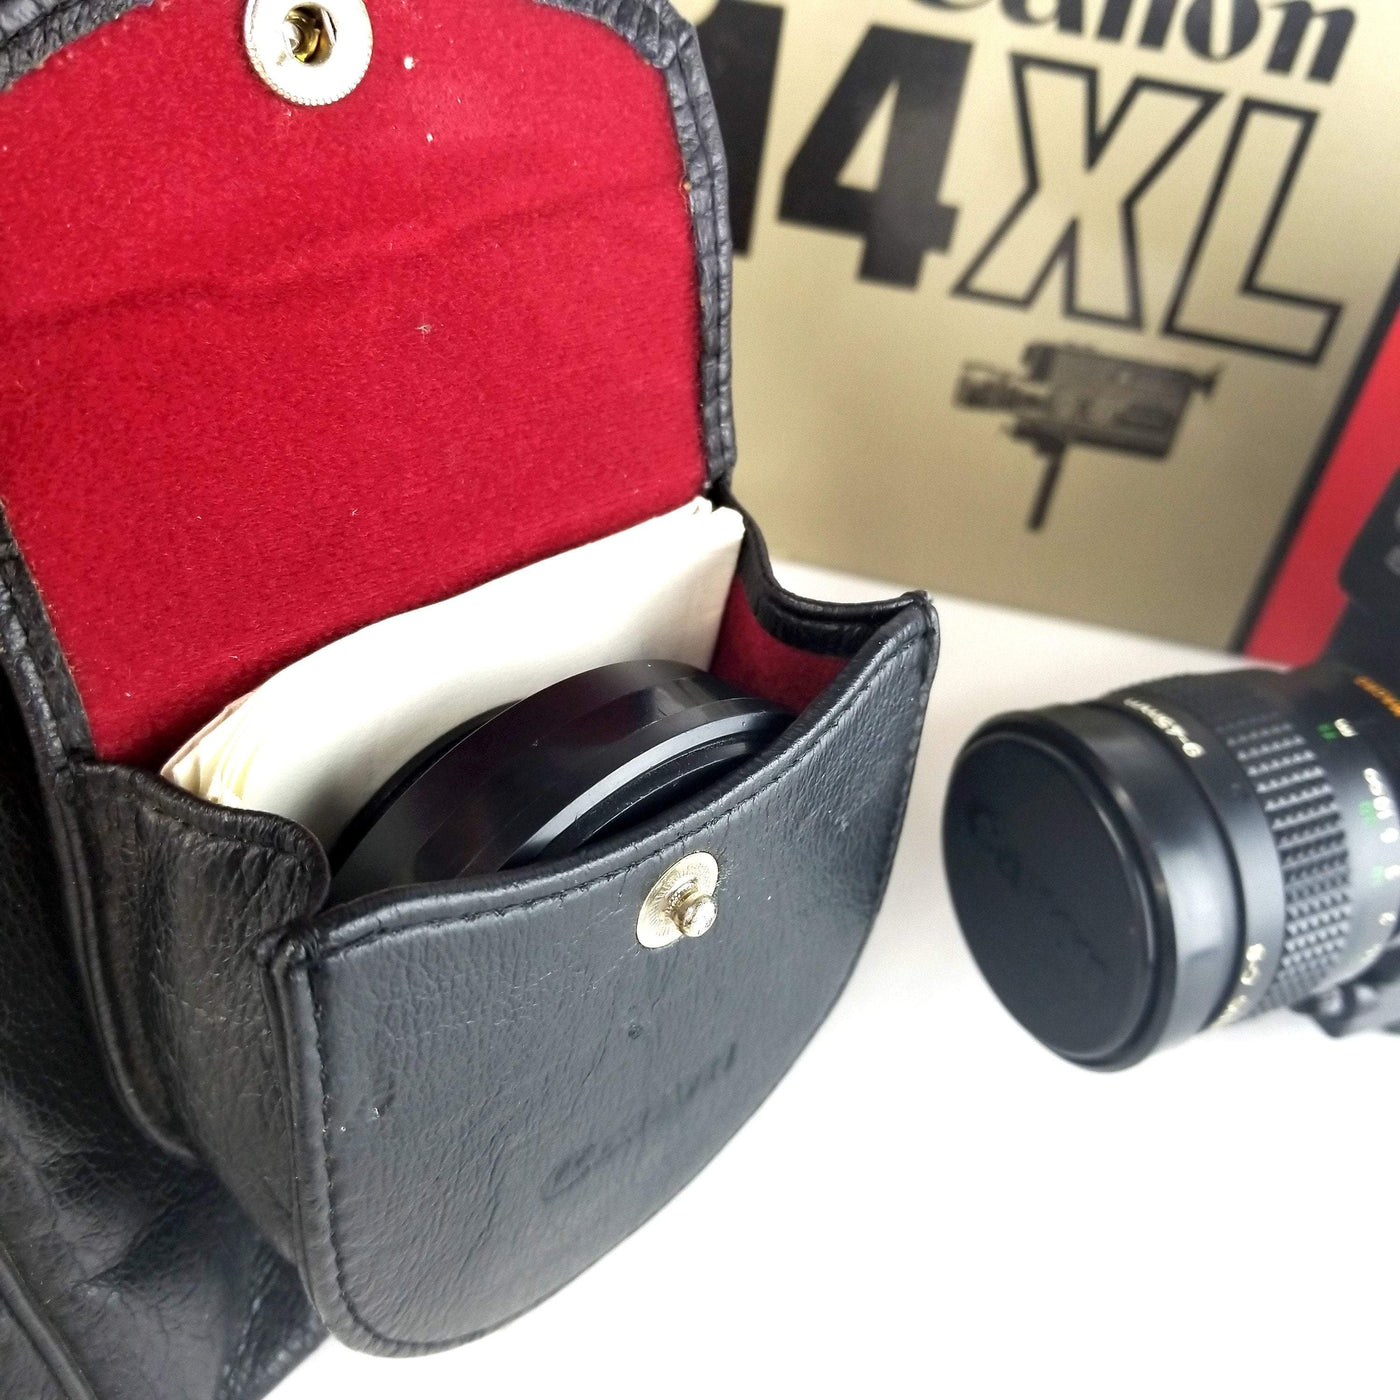 Canon 514XL Super 8 Camera - ULTIMATE SET Professionally Serviced and Fully Tested Super 8 Cameras Canon 